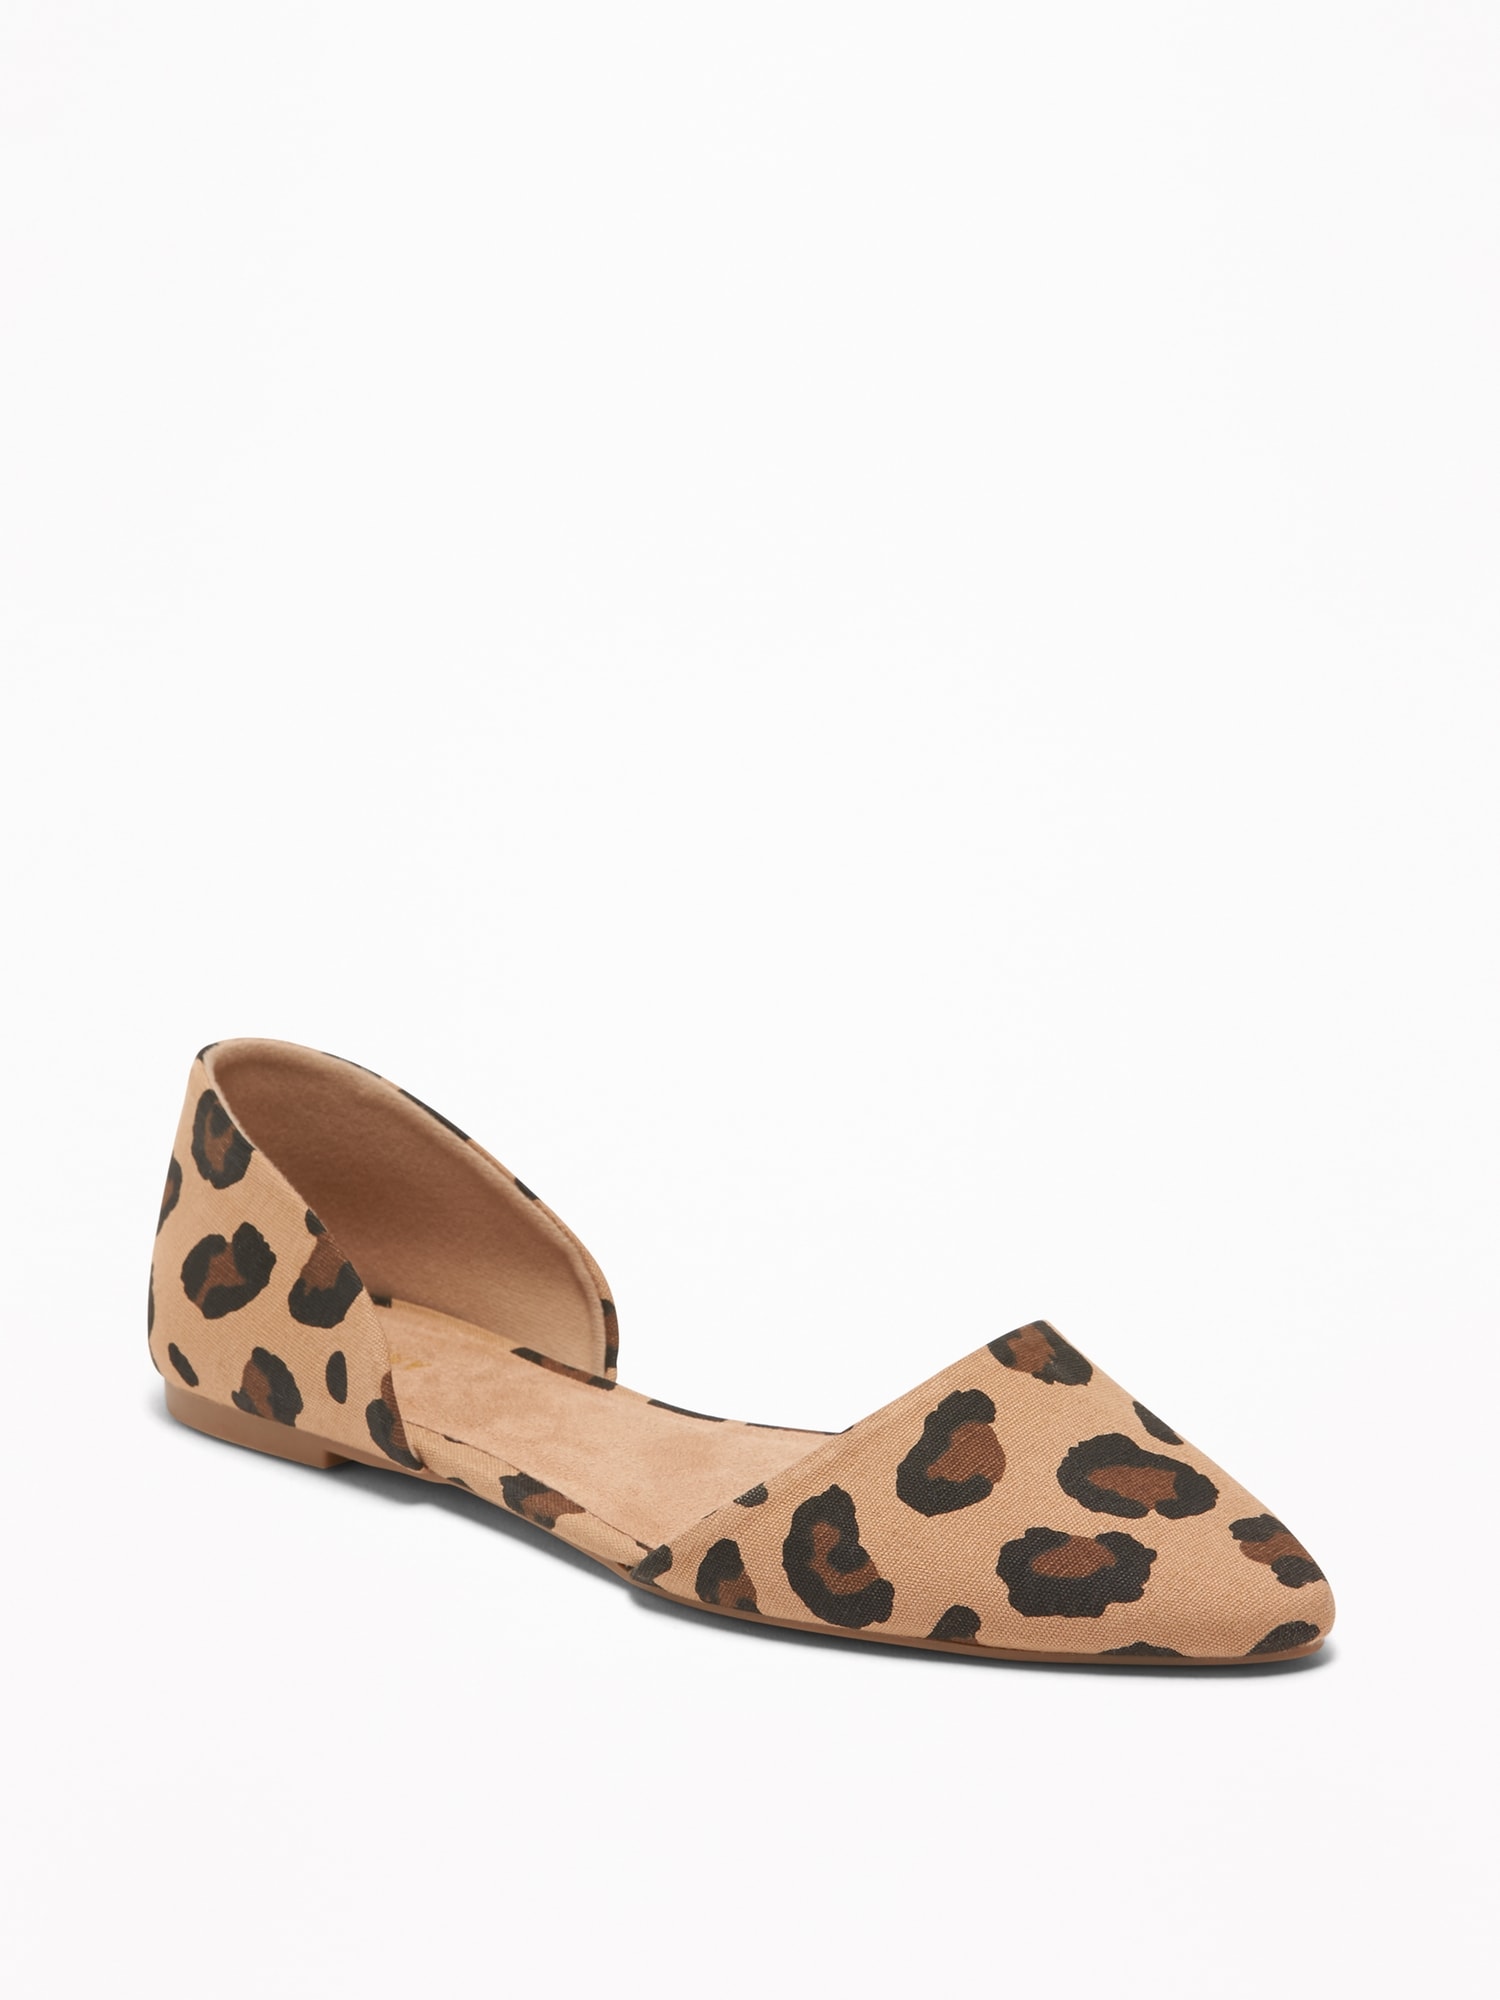 D'Orsay Flats for Women | Old Navy